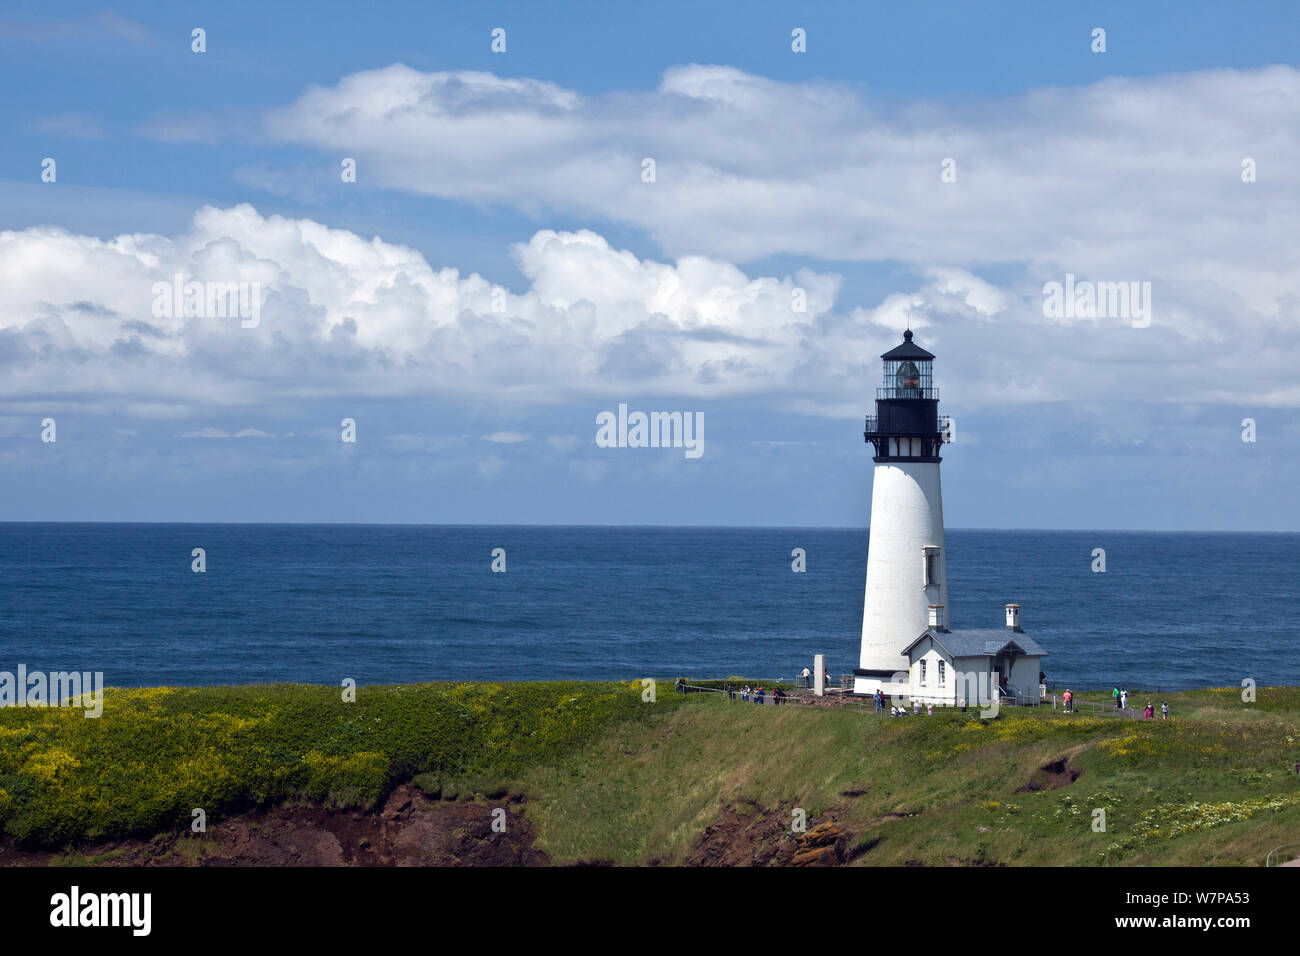 Yaquina Head Lighthouse perched on a bluff above the Pacific Ocean in Yaquina Head Outstanding Natural Area near Newport, Oregon, USA, June 2012 Stock Photo